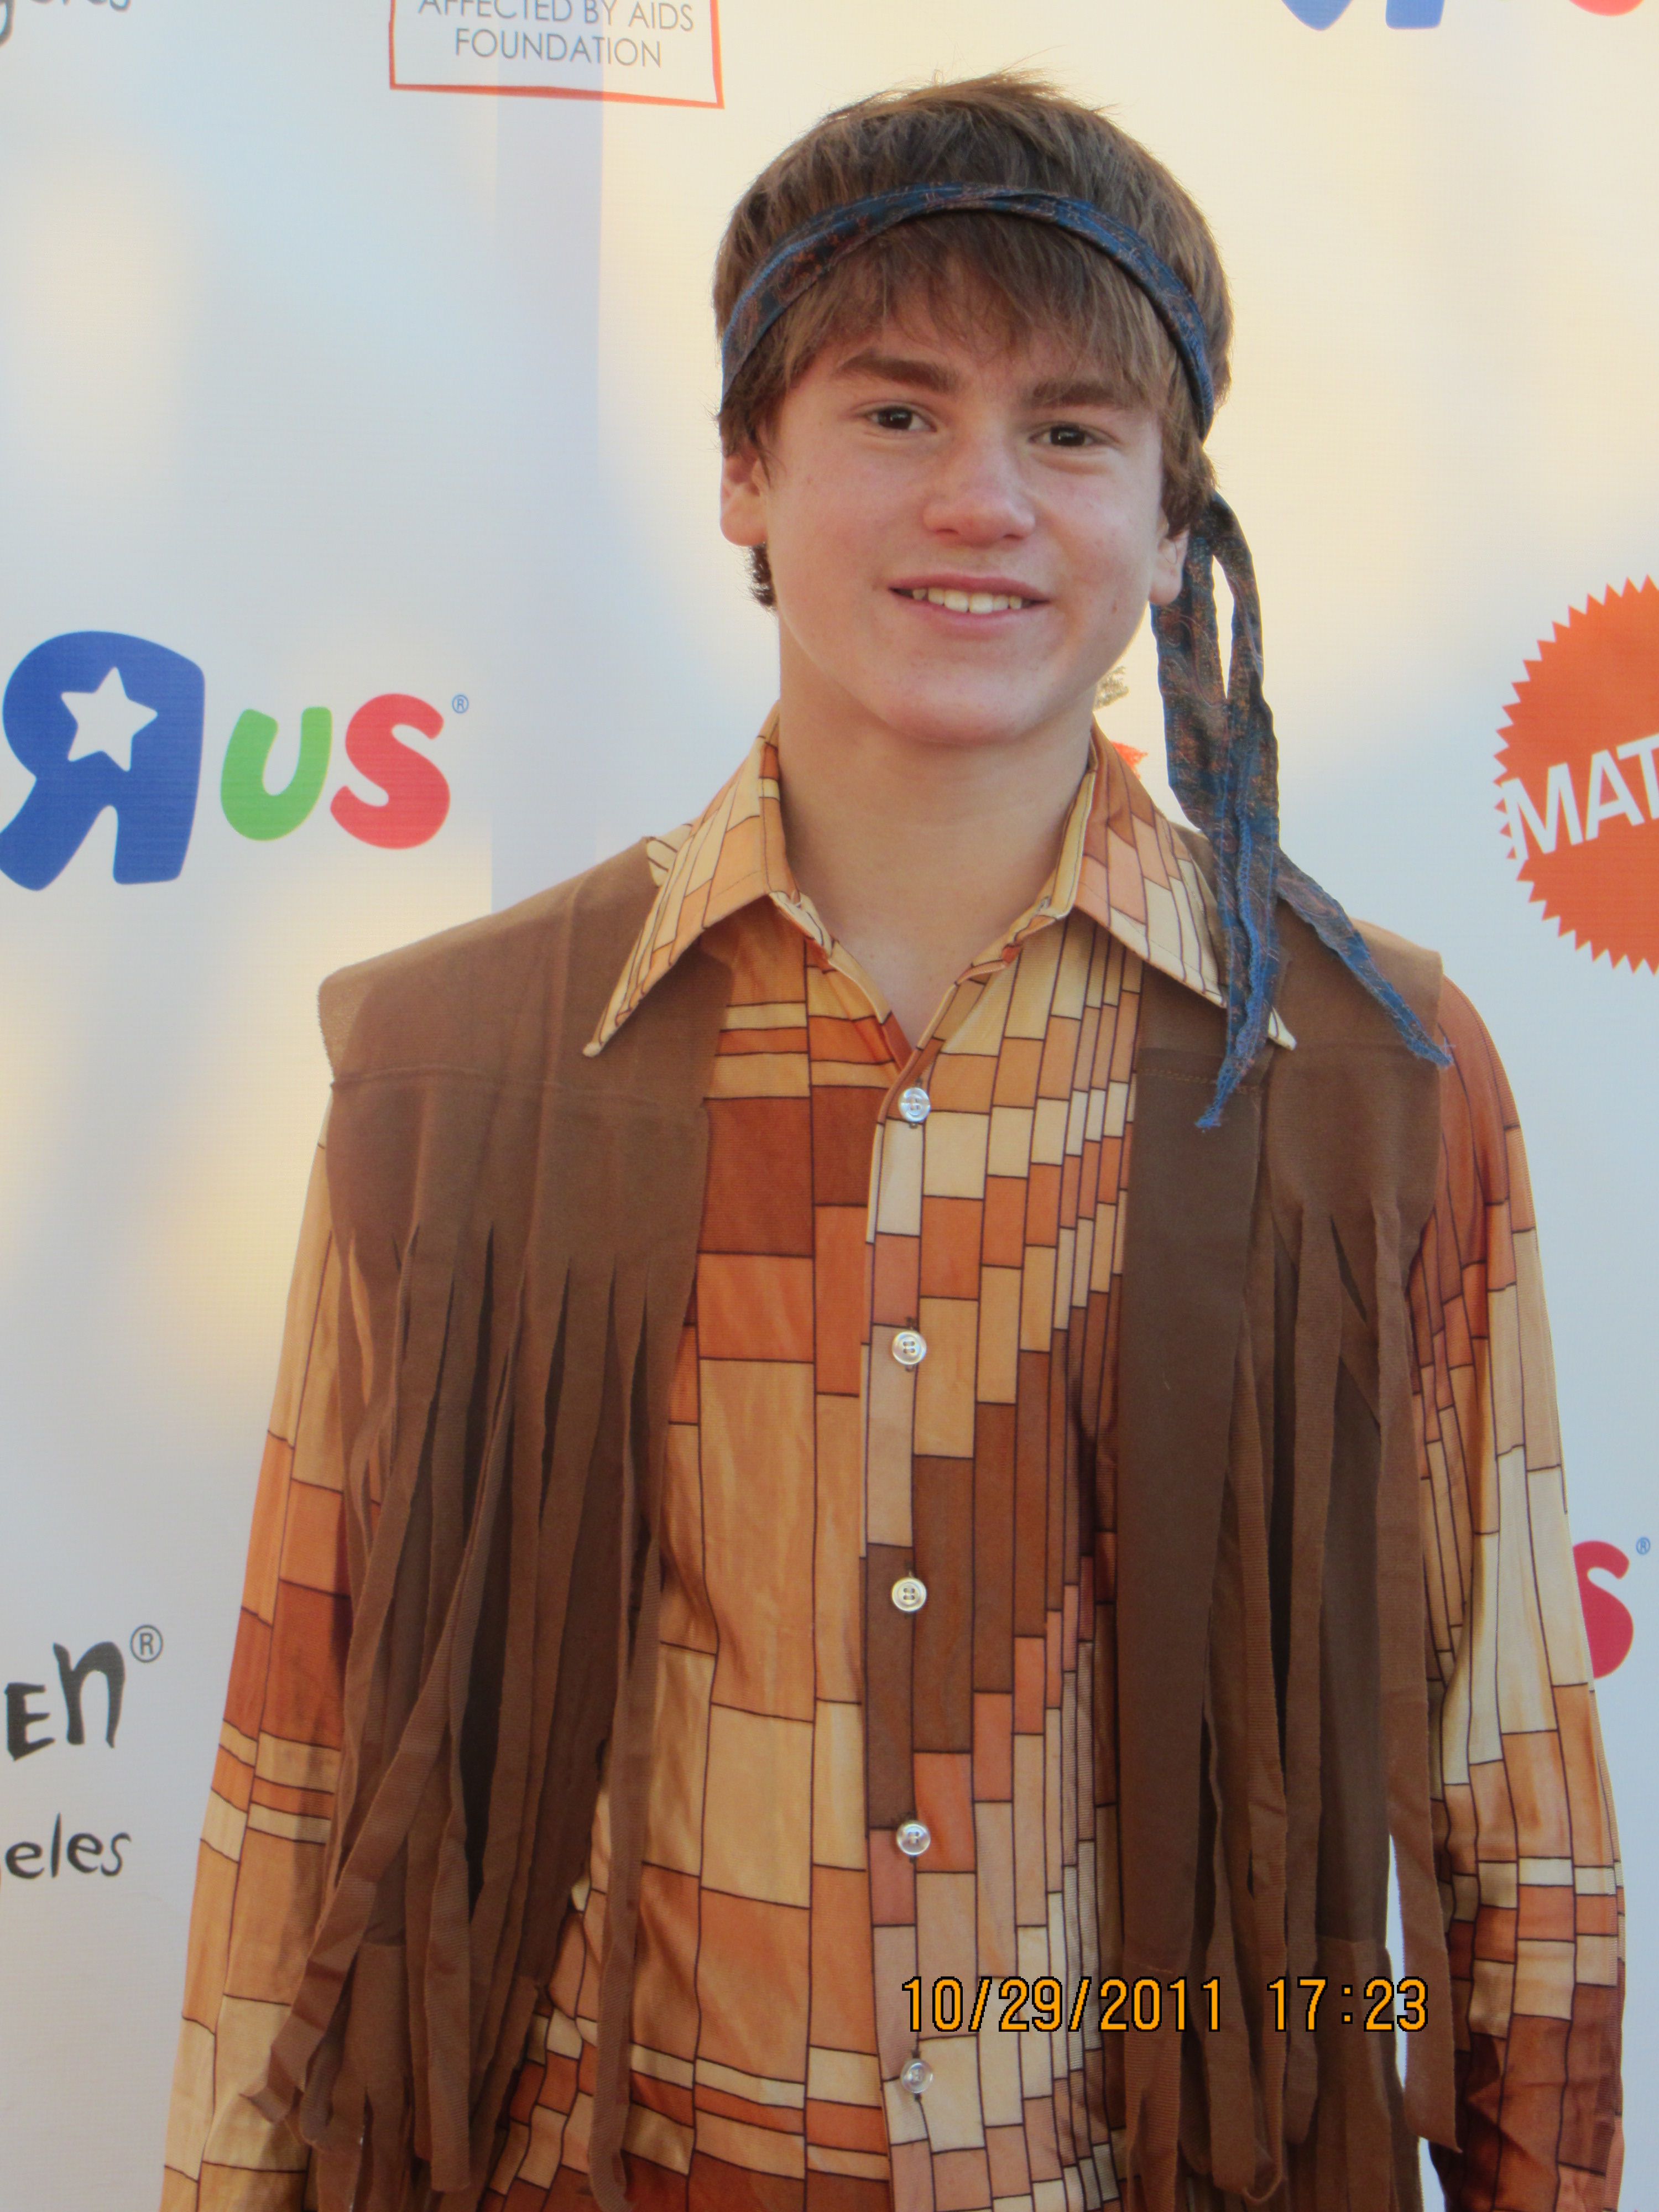 Children Affected by AIDS Foundations Dream Halloween event- Justin Tinucci on the red carpet